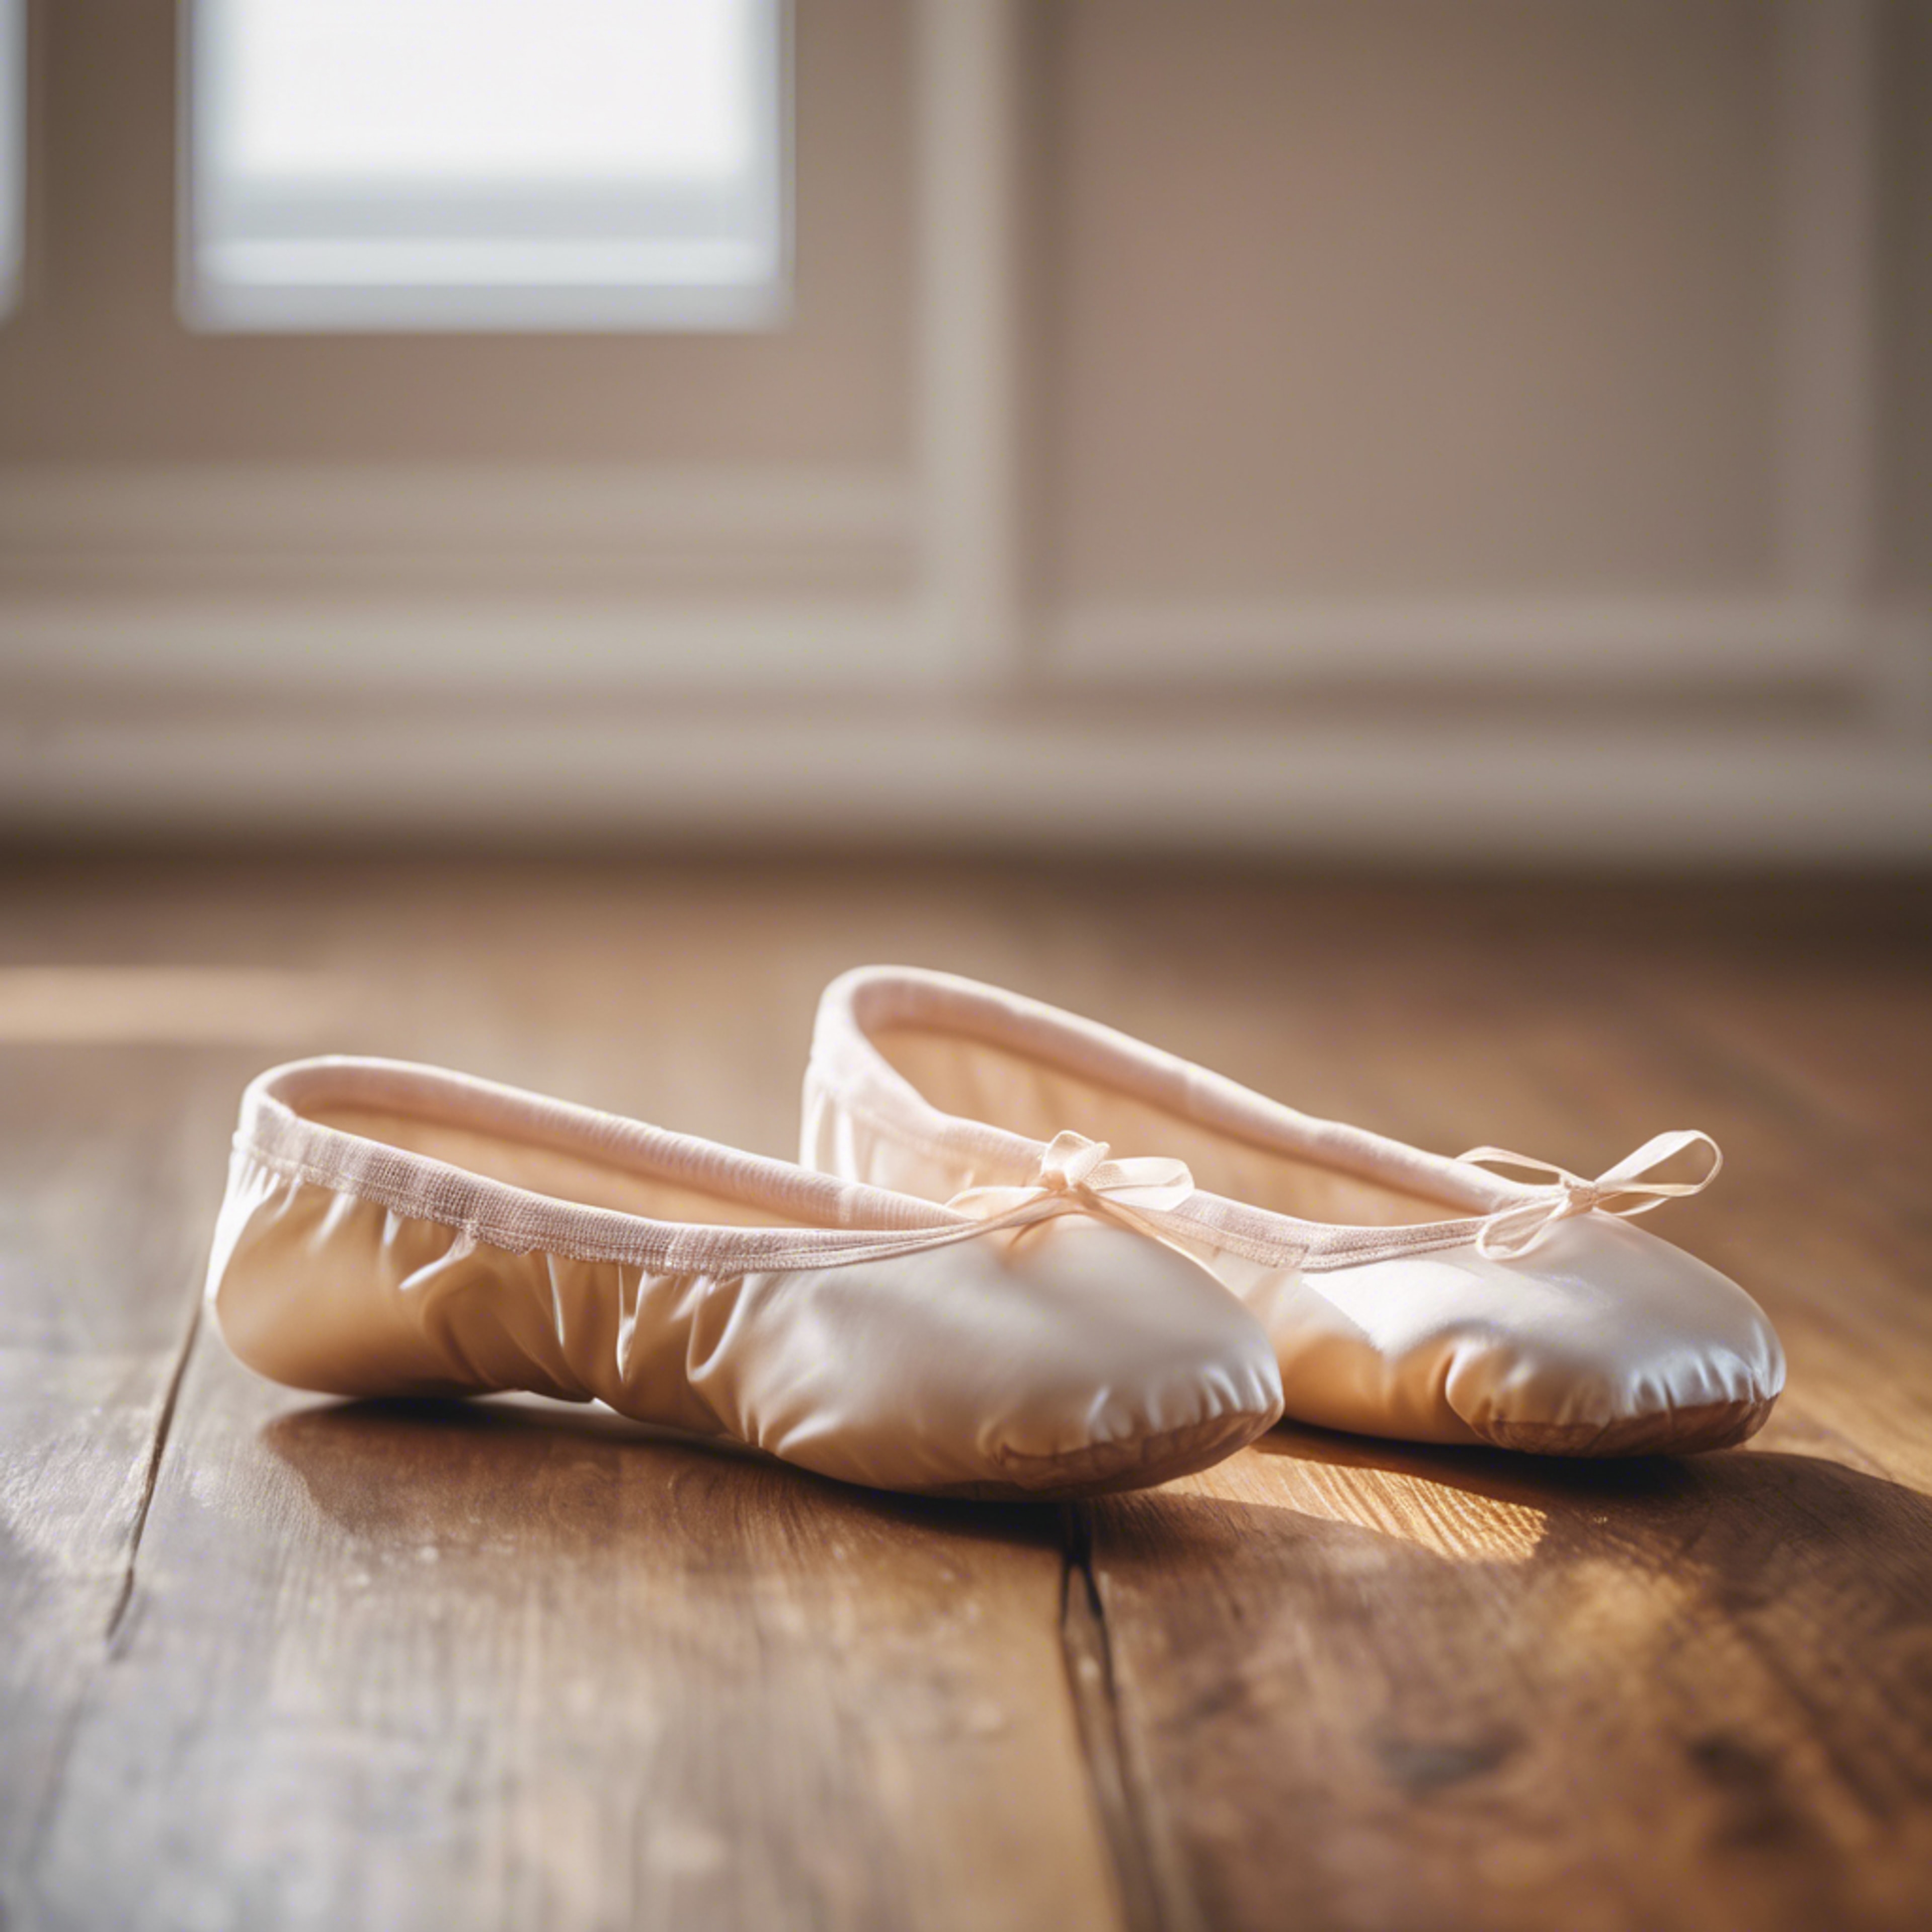 Close up of a pair of cream-colored ballet slippers on a hardwood floor. Tapet[4efd7208256149a9b923]